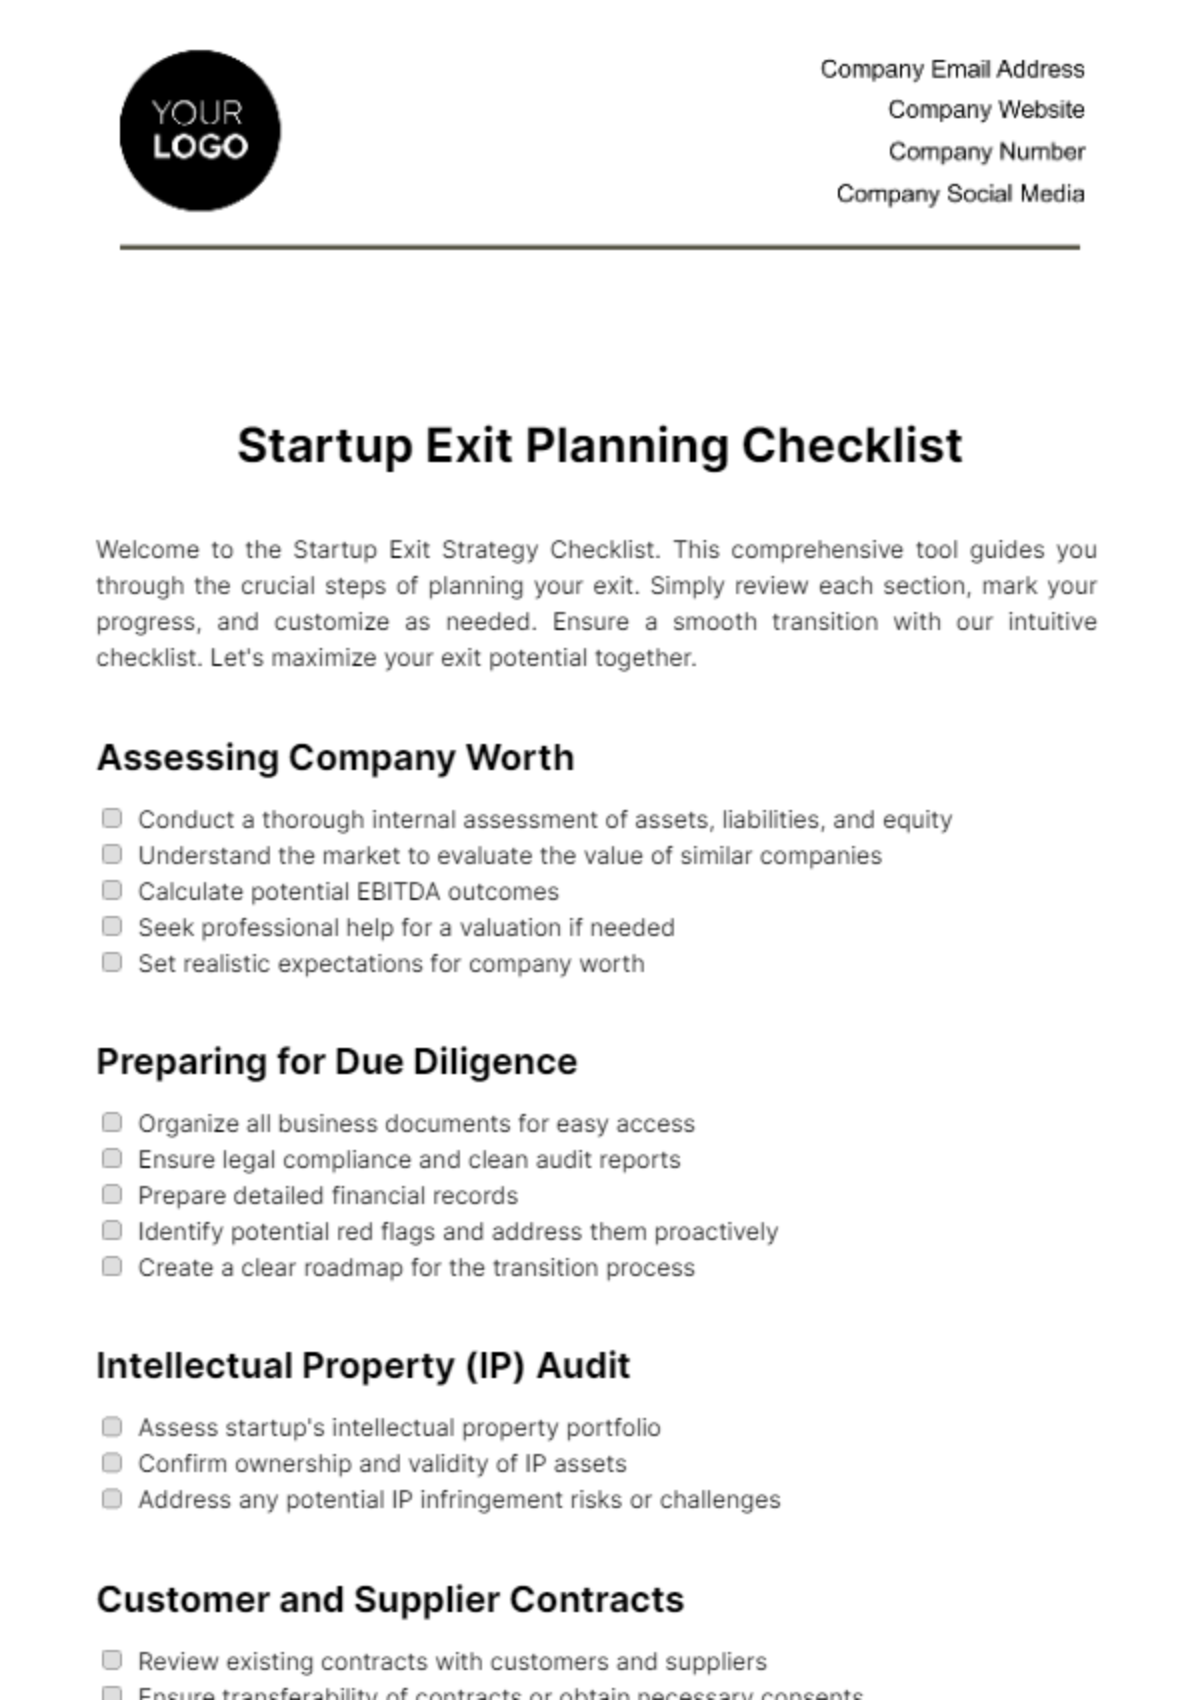 Startup Exit Strategy Checklist Template